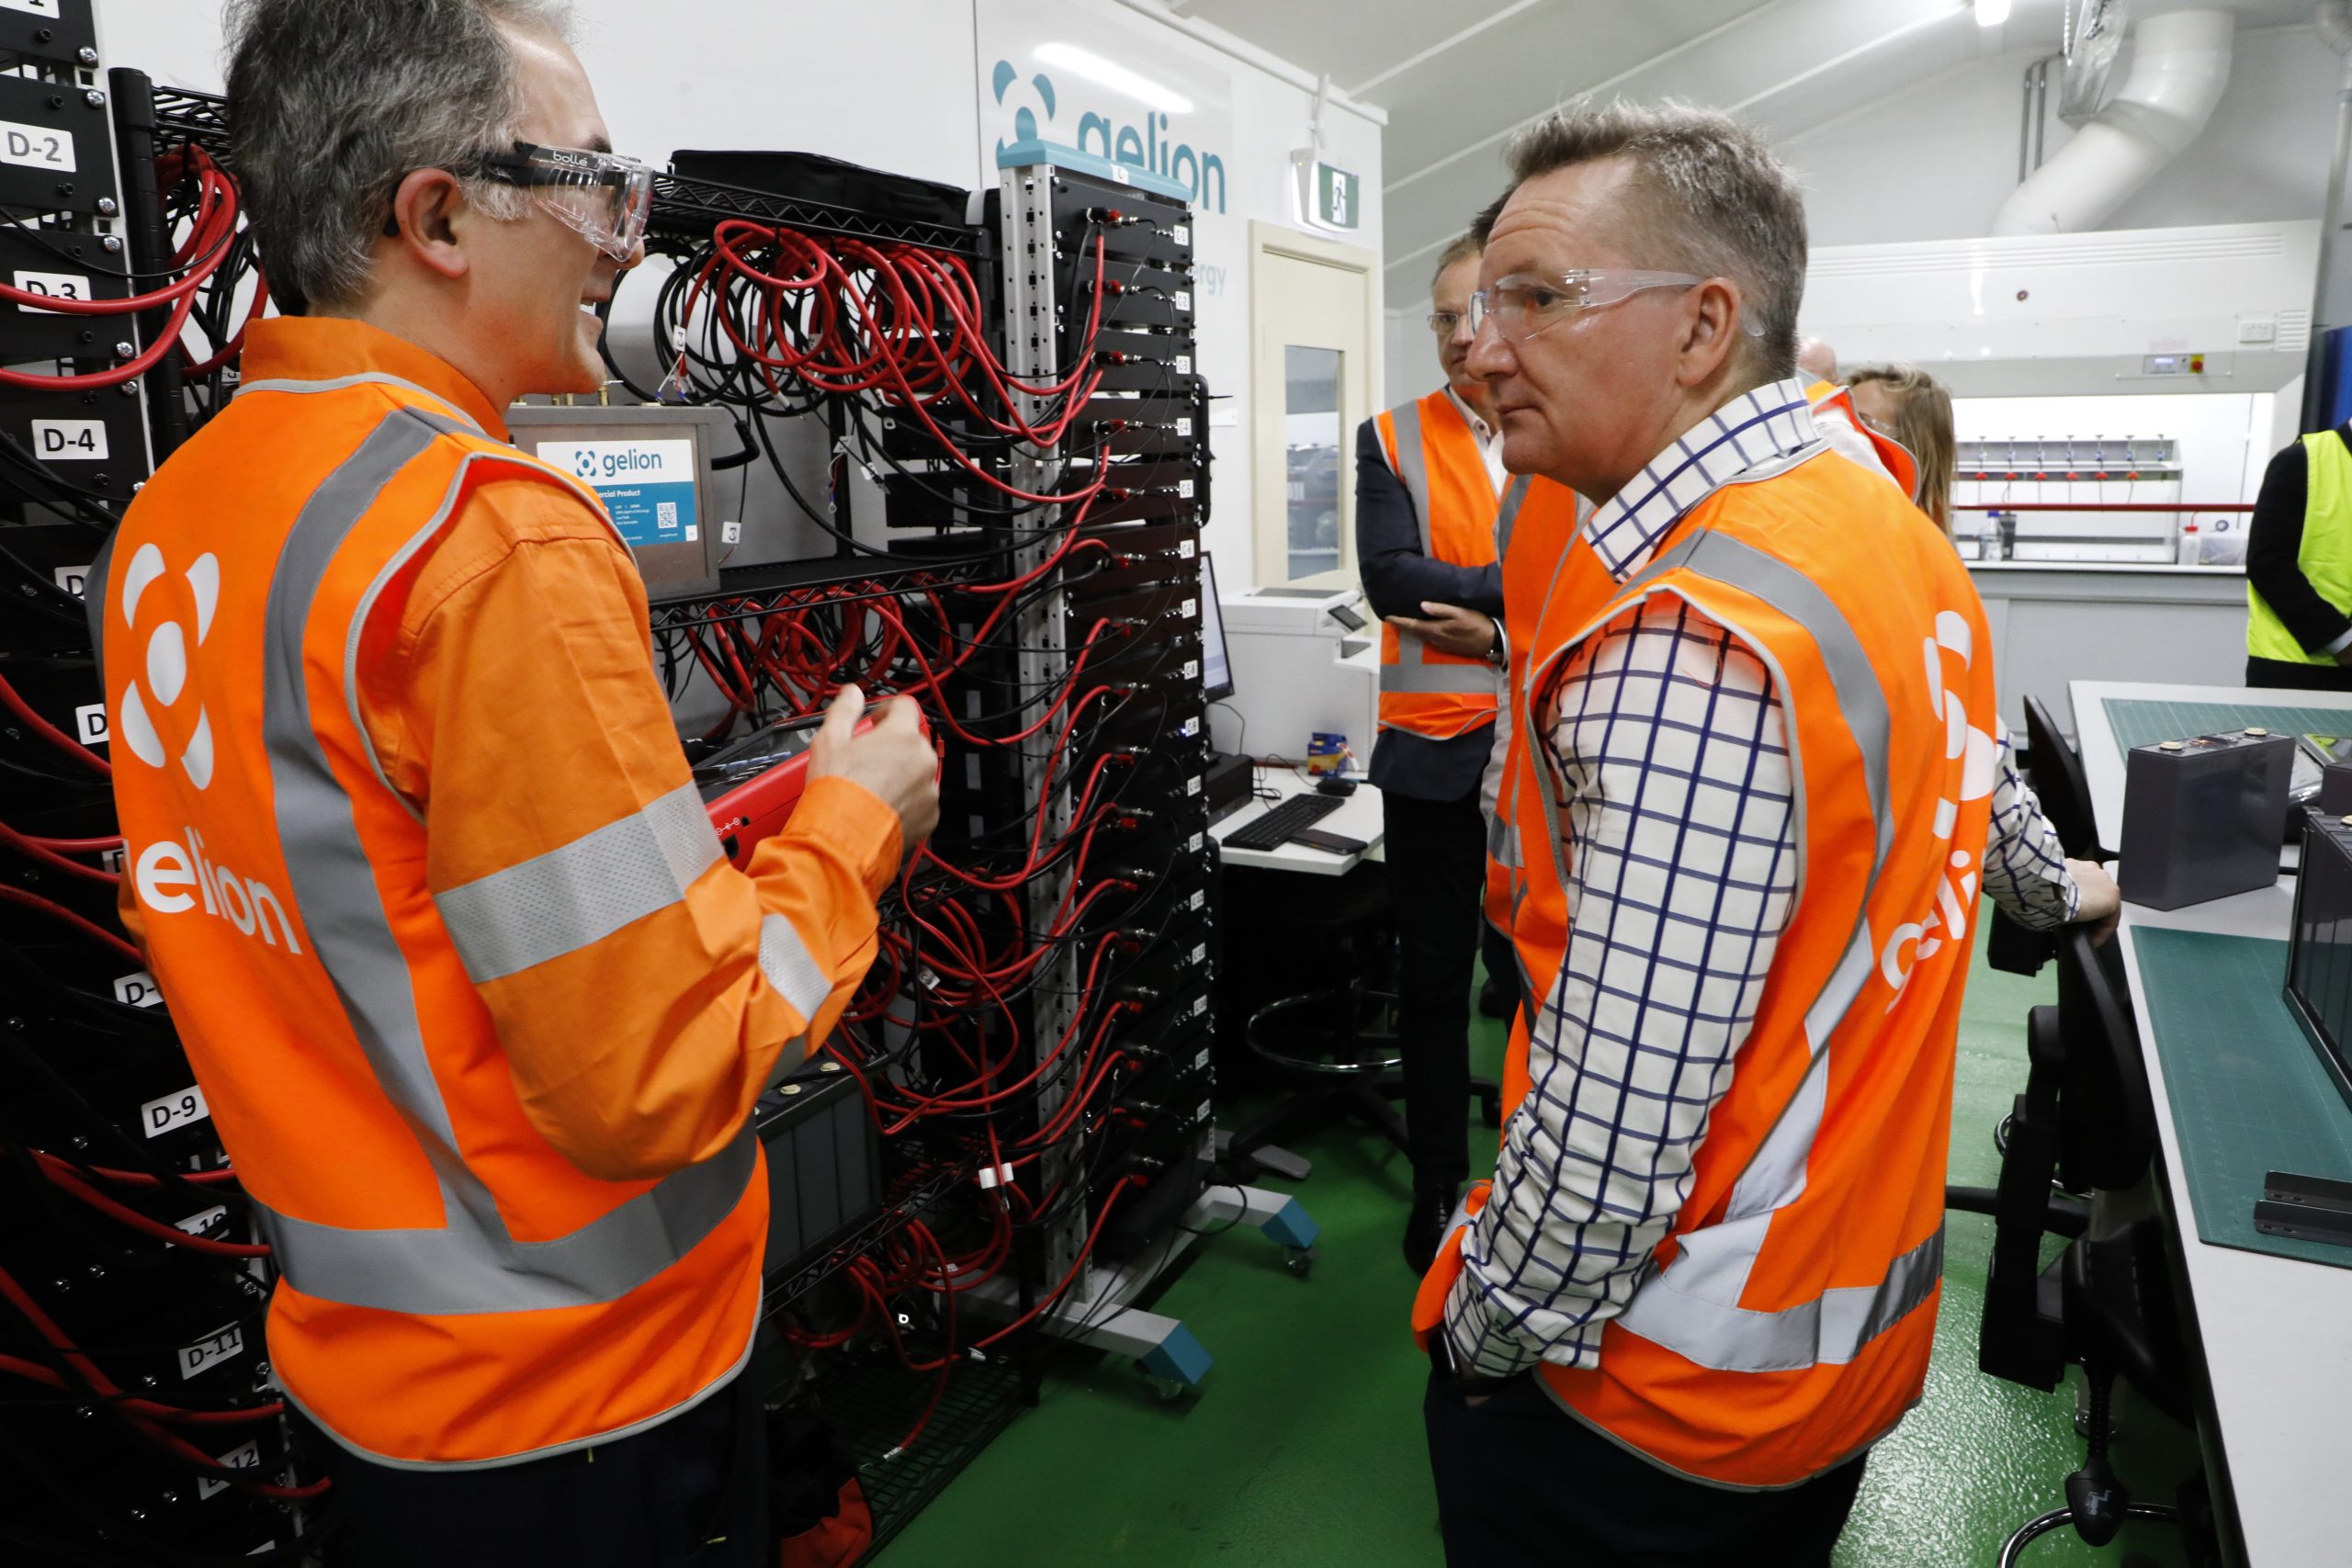 Gelion launches Australian battery manufacturing facility